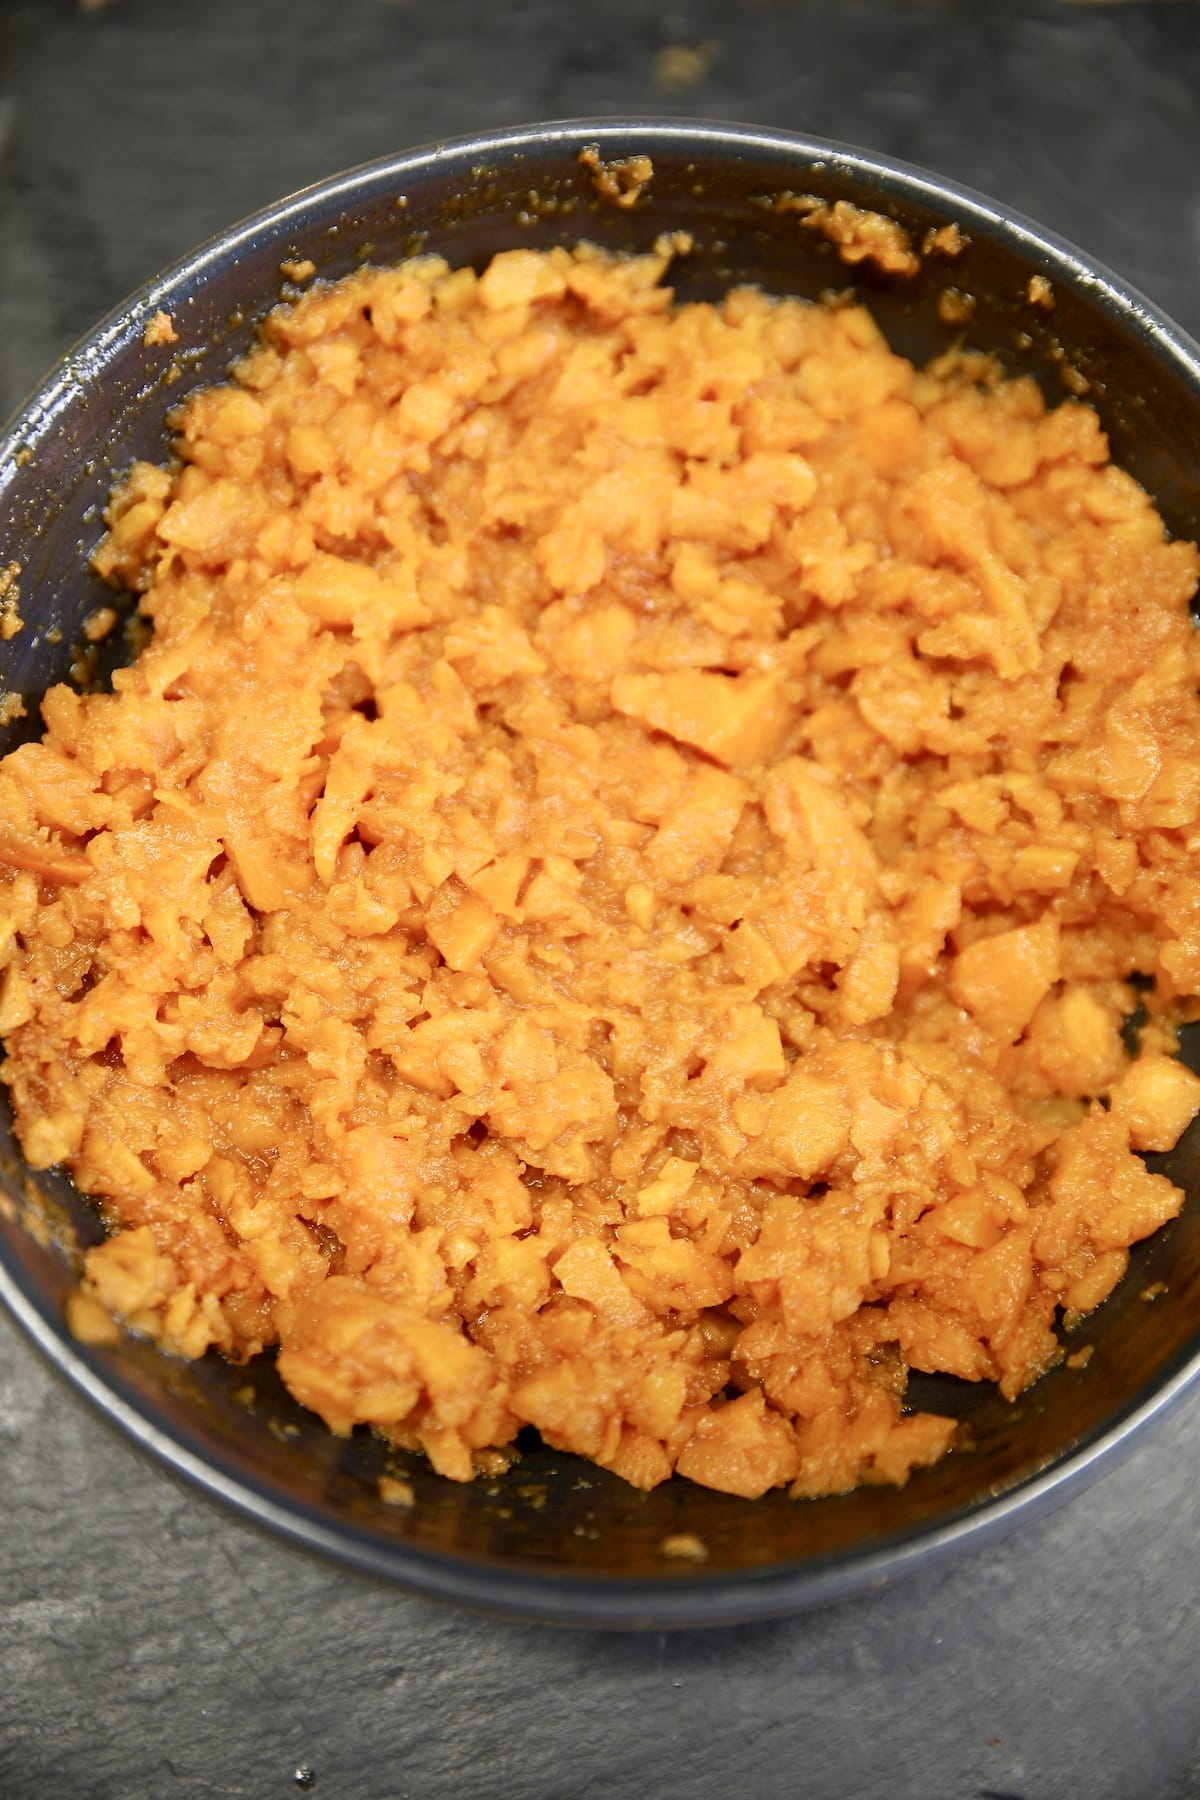 Bowl of coarsely mashed sweet potatoes.